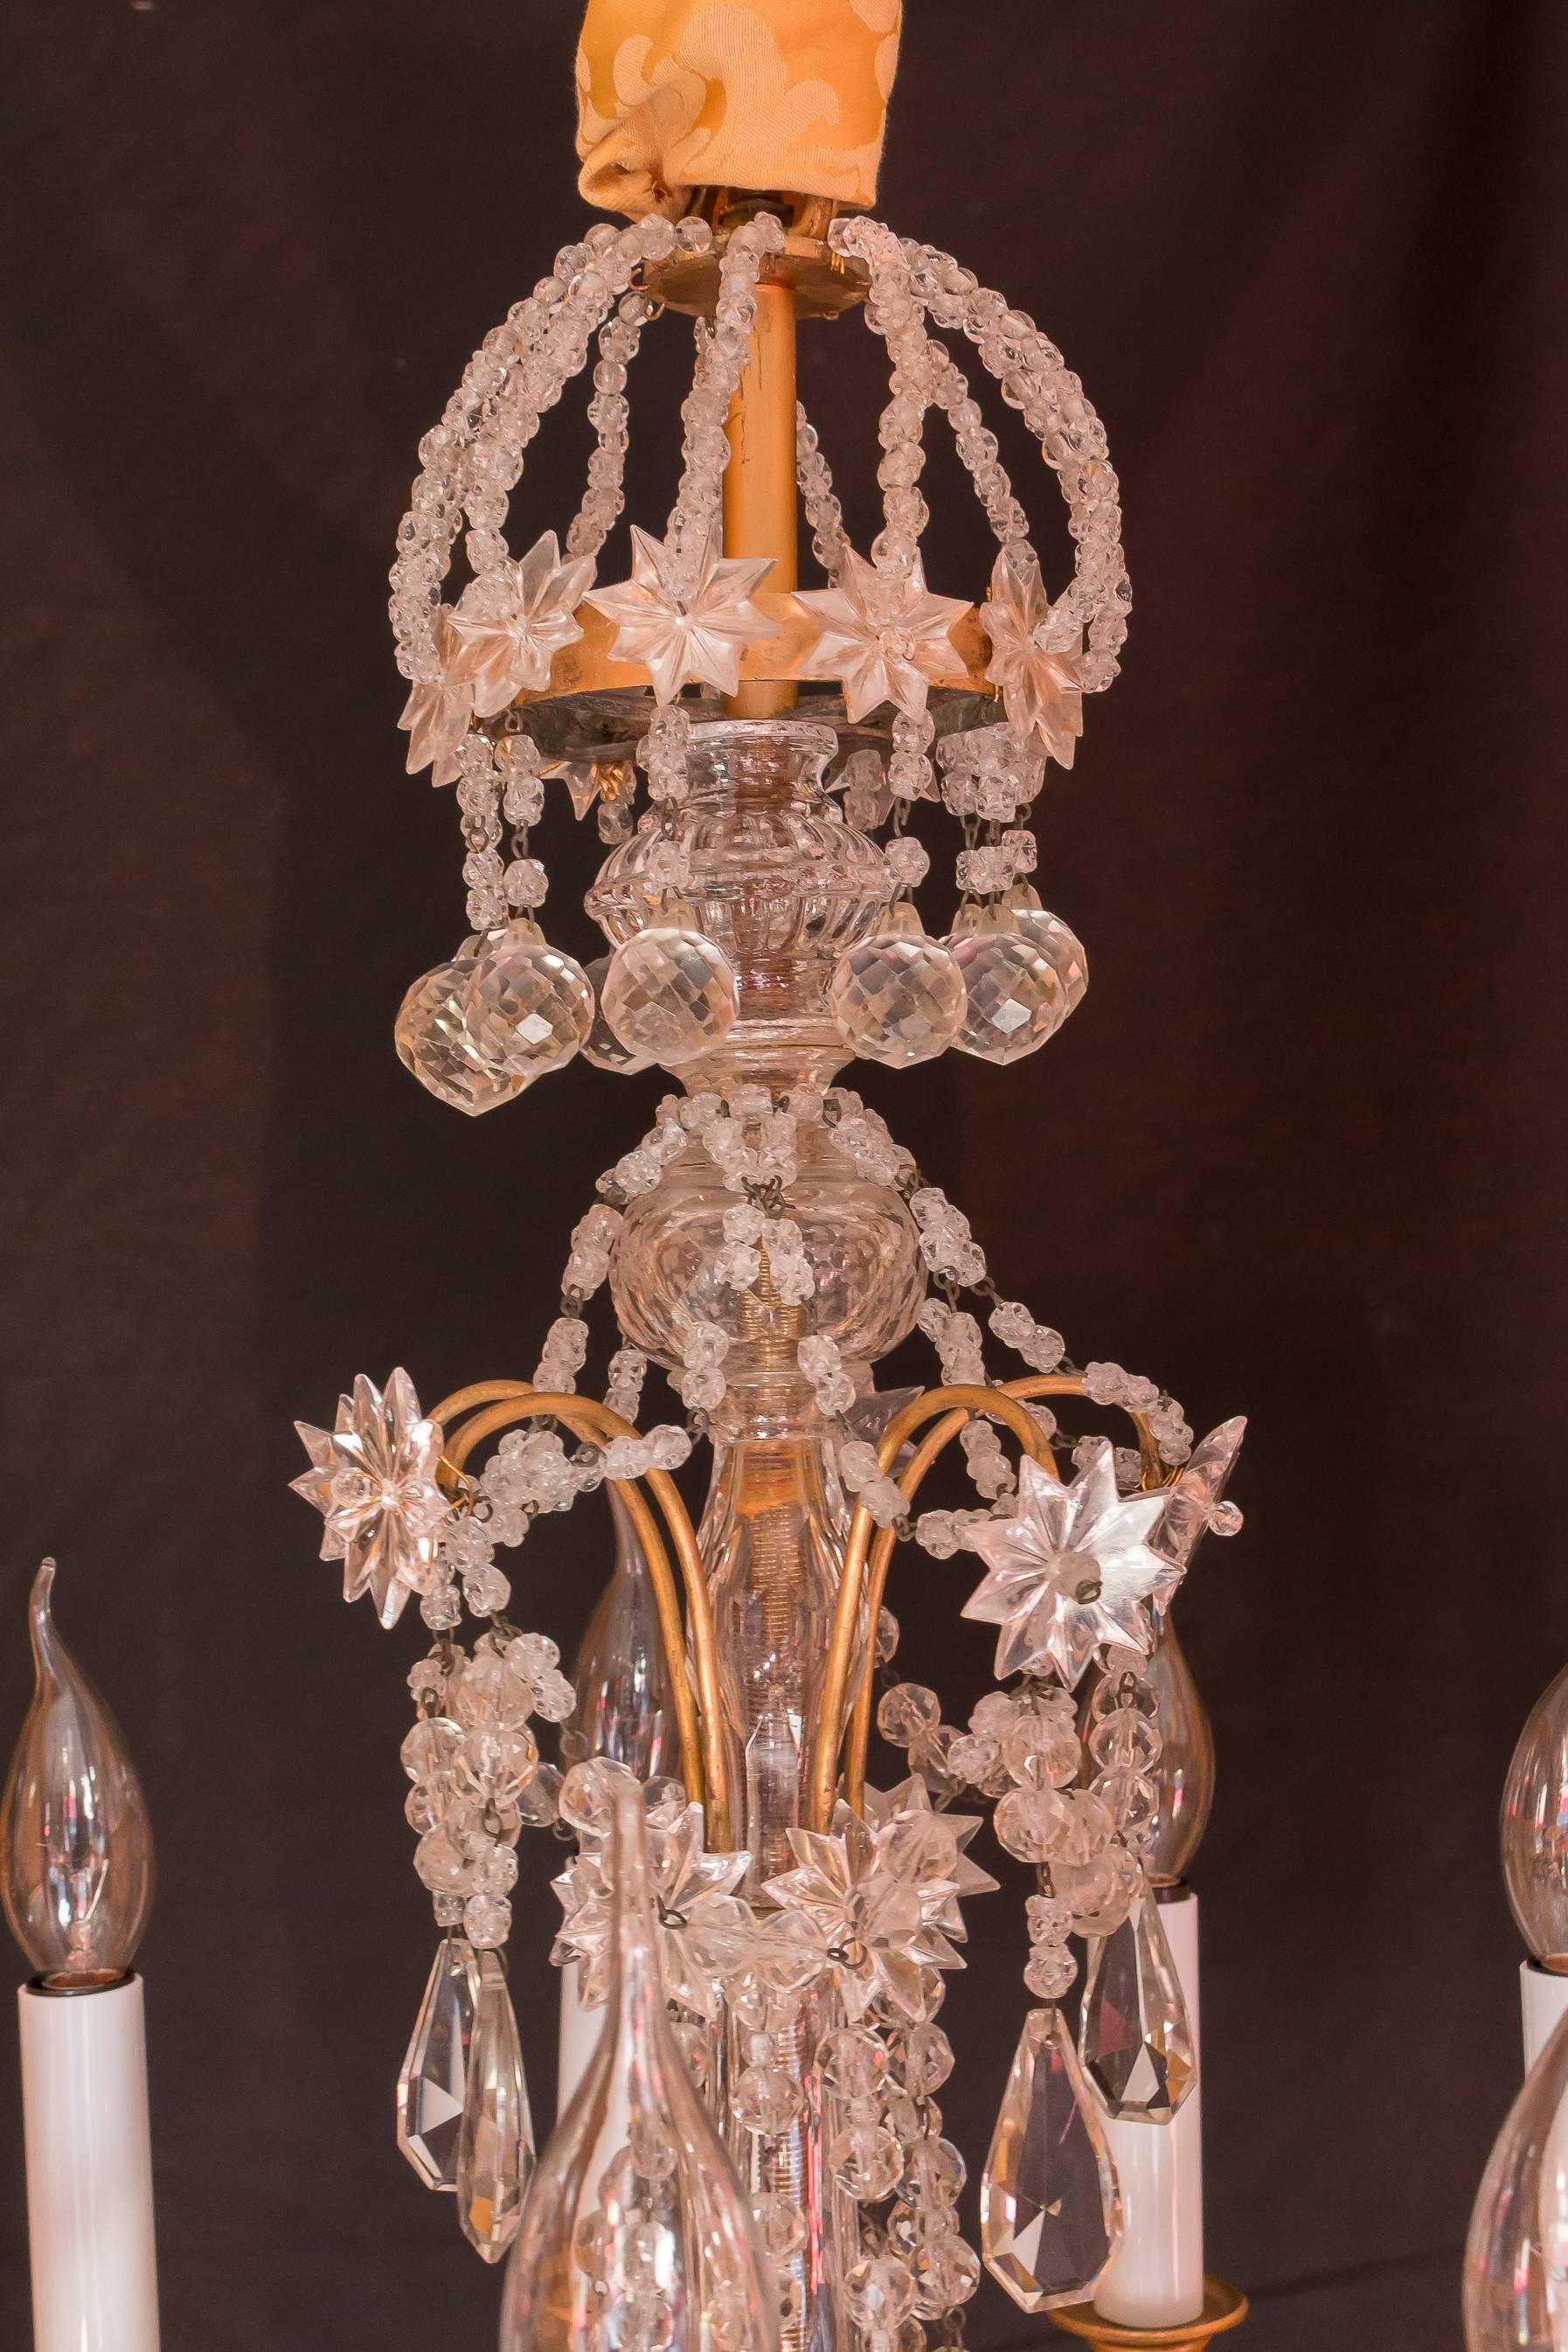 Amazing an decorative original gilt bronze and hand-cut crystal small chandelier in a classical Louis XIV style. Interesting top crystal crown and lot of fine quality hand-cut crystal, little balls, plaques and pearls. It is terminated by a lovely